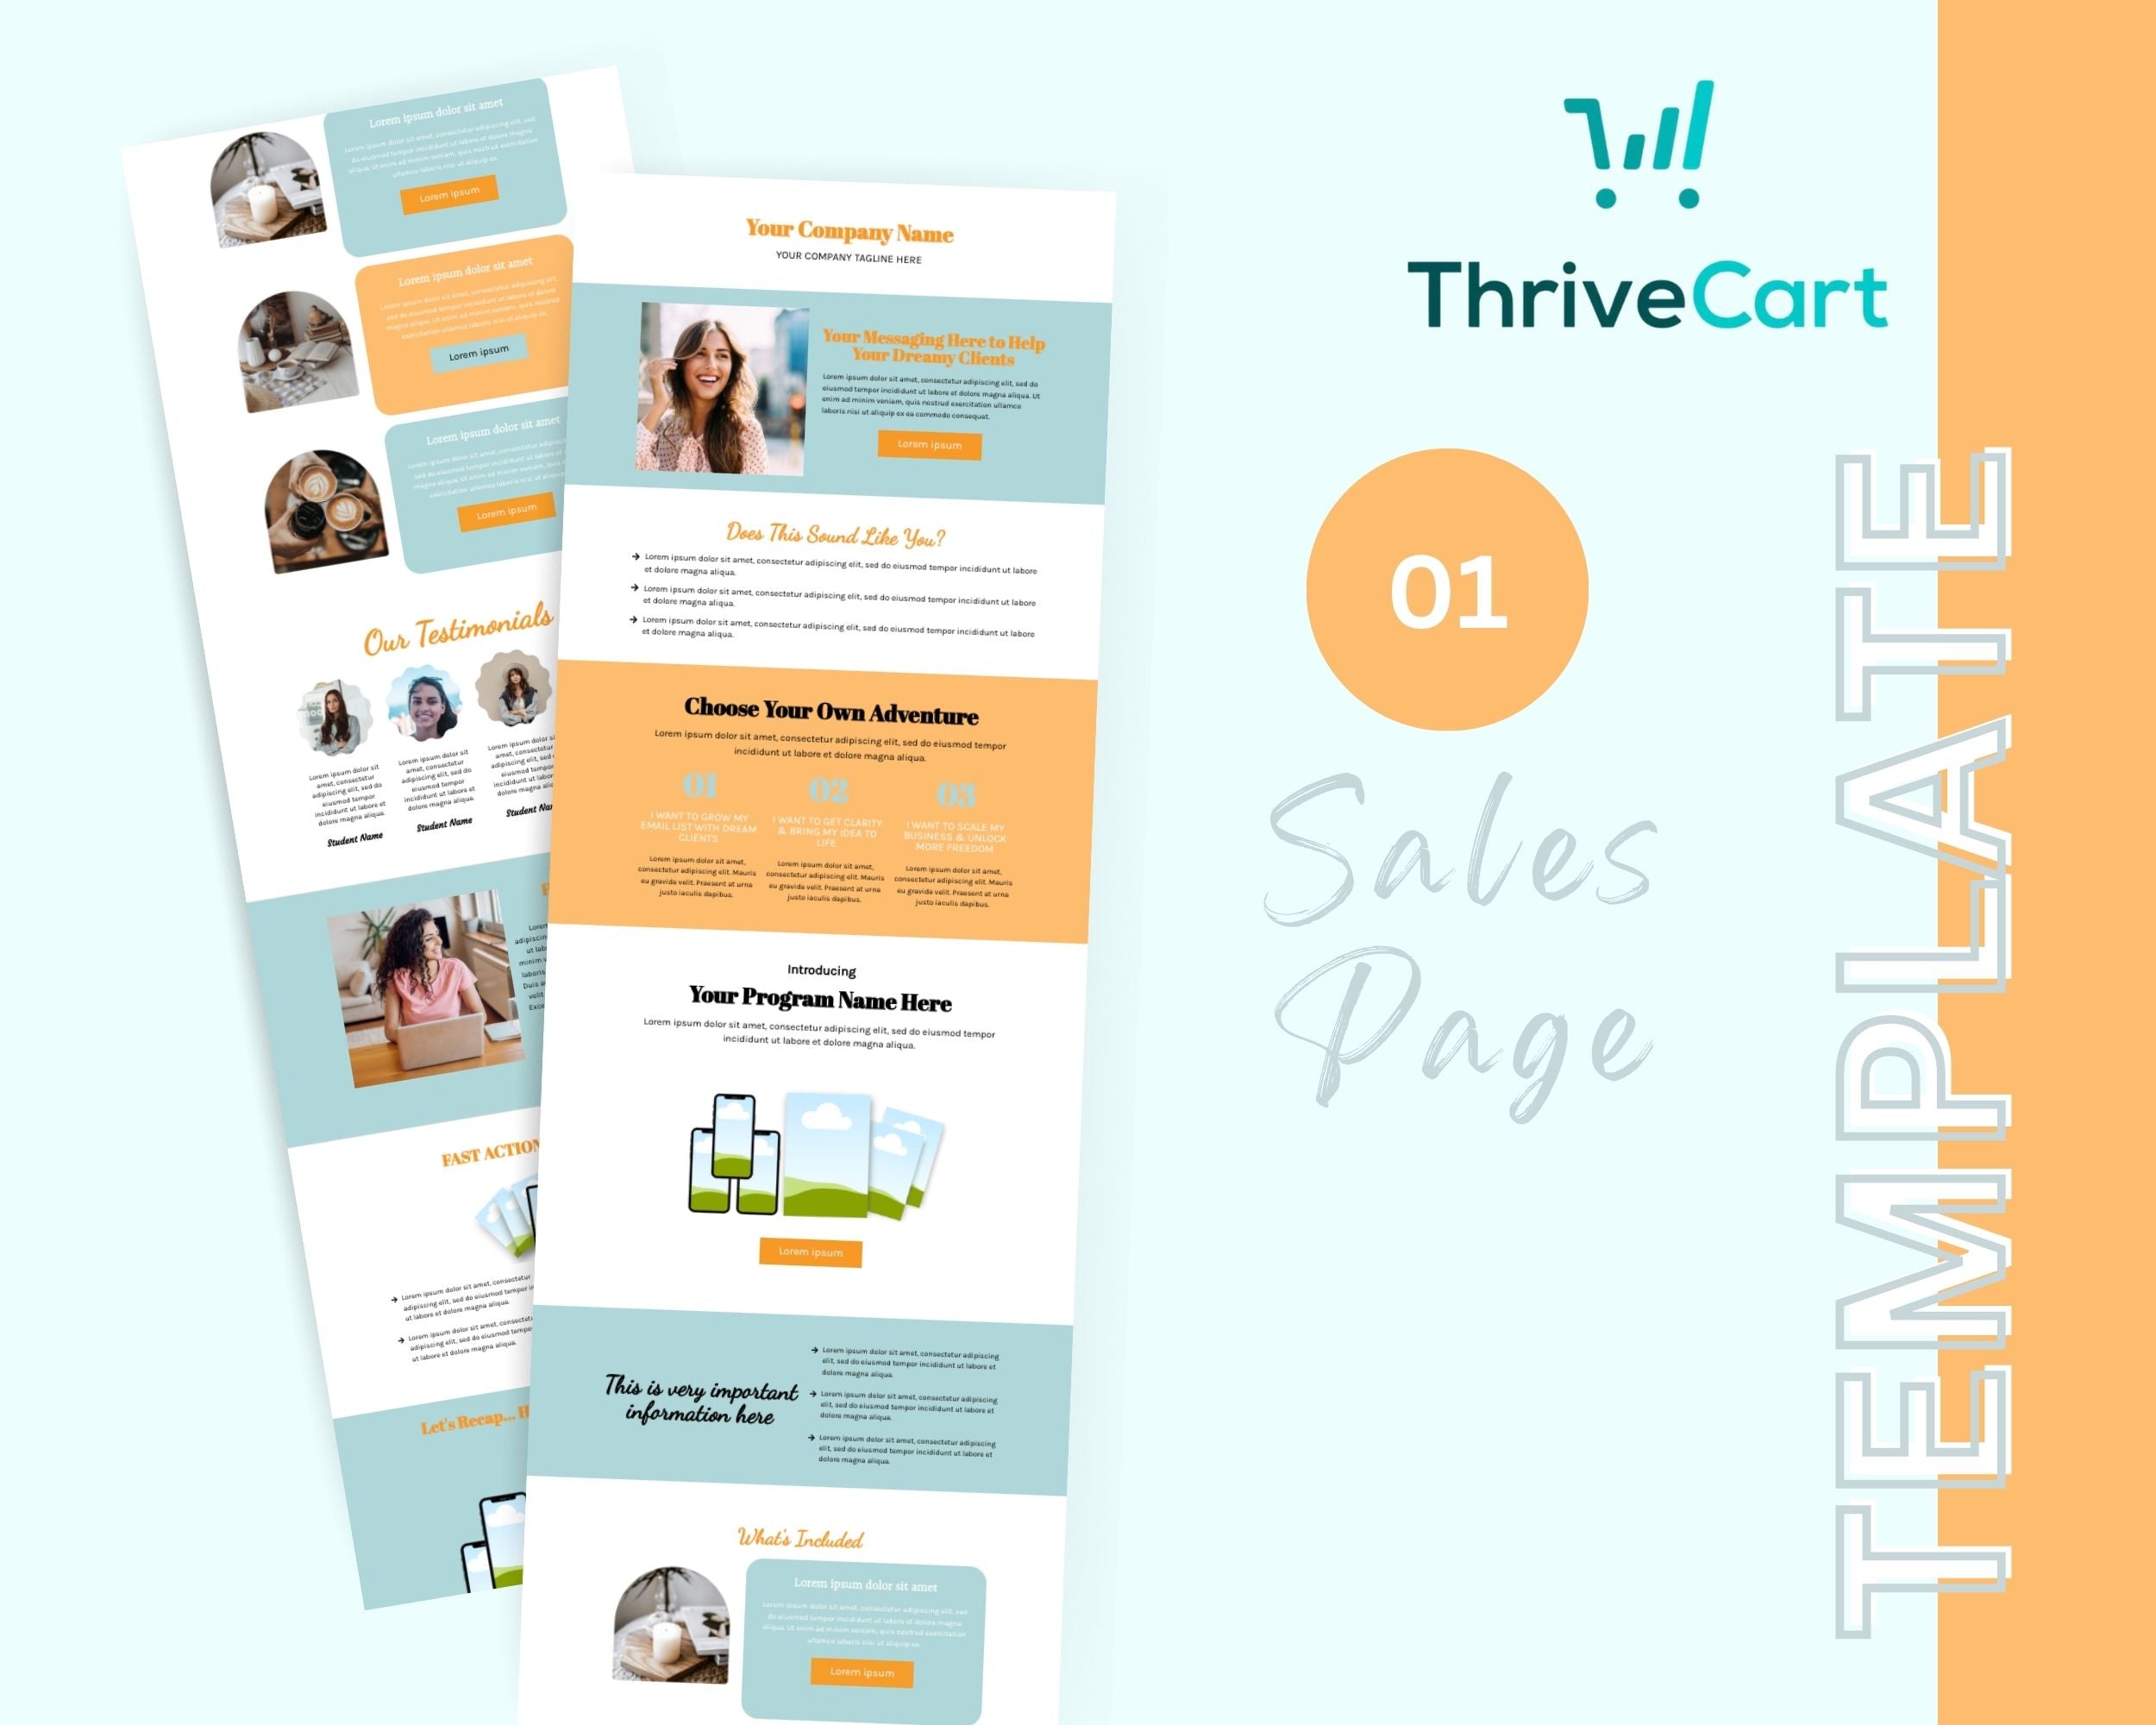 Green & Gold ThriveCart 4-Page Sales Funnel Template